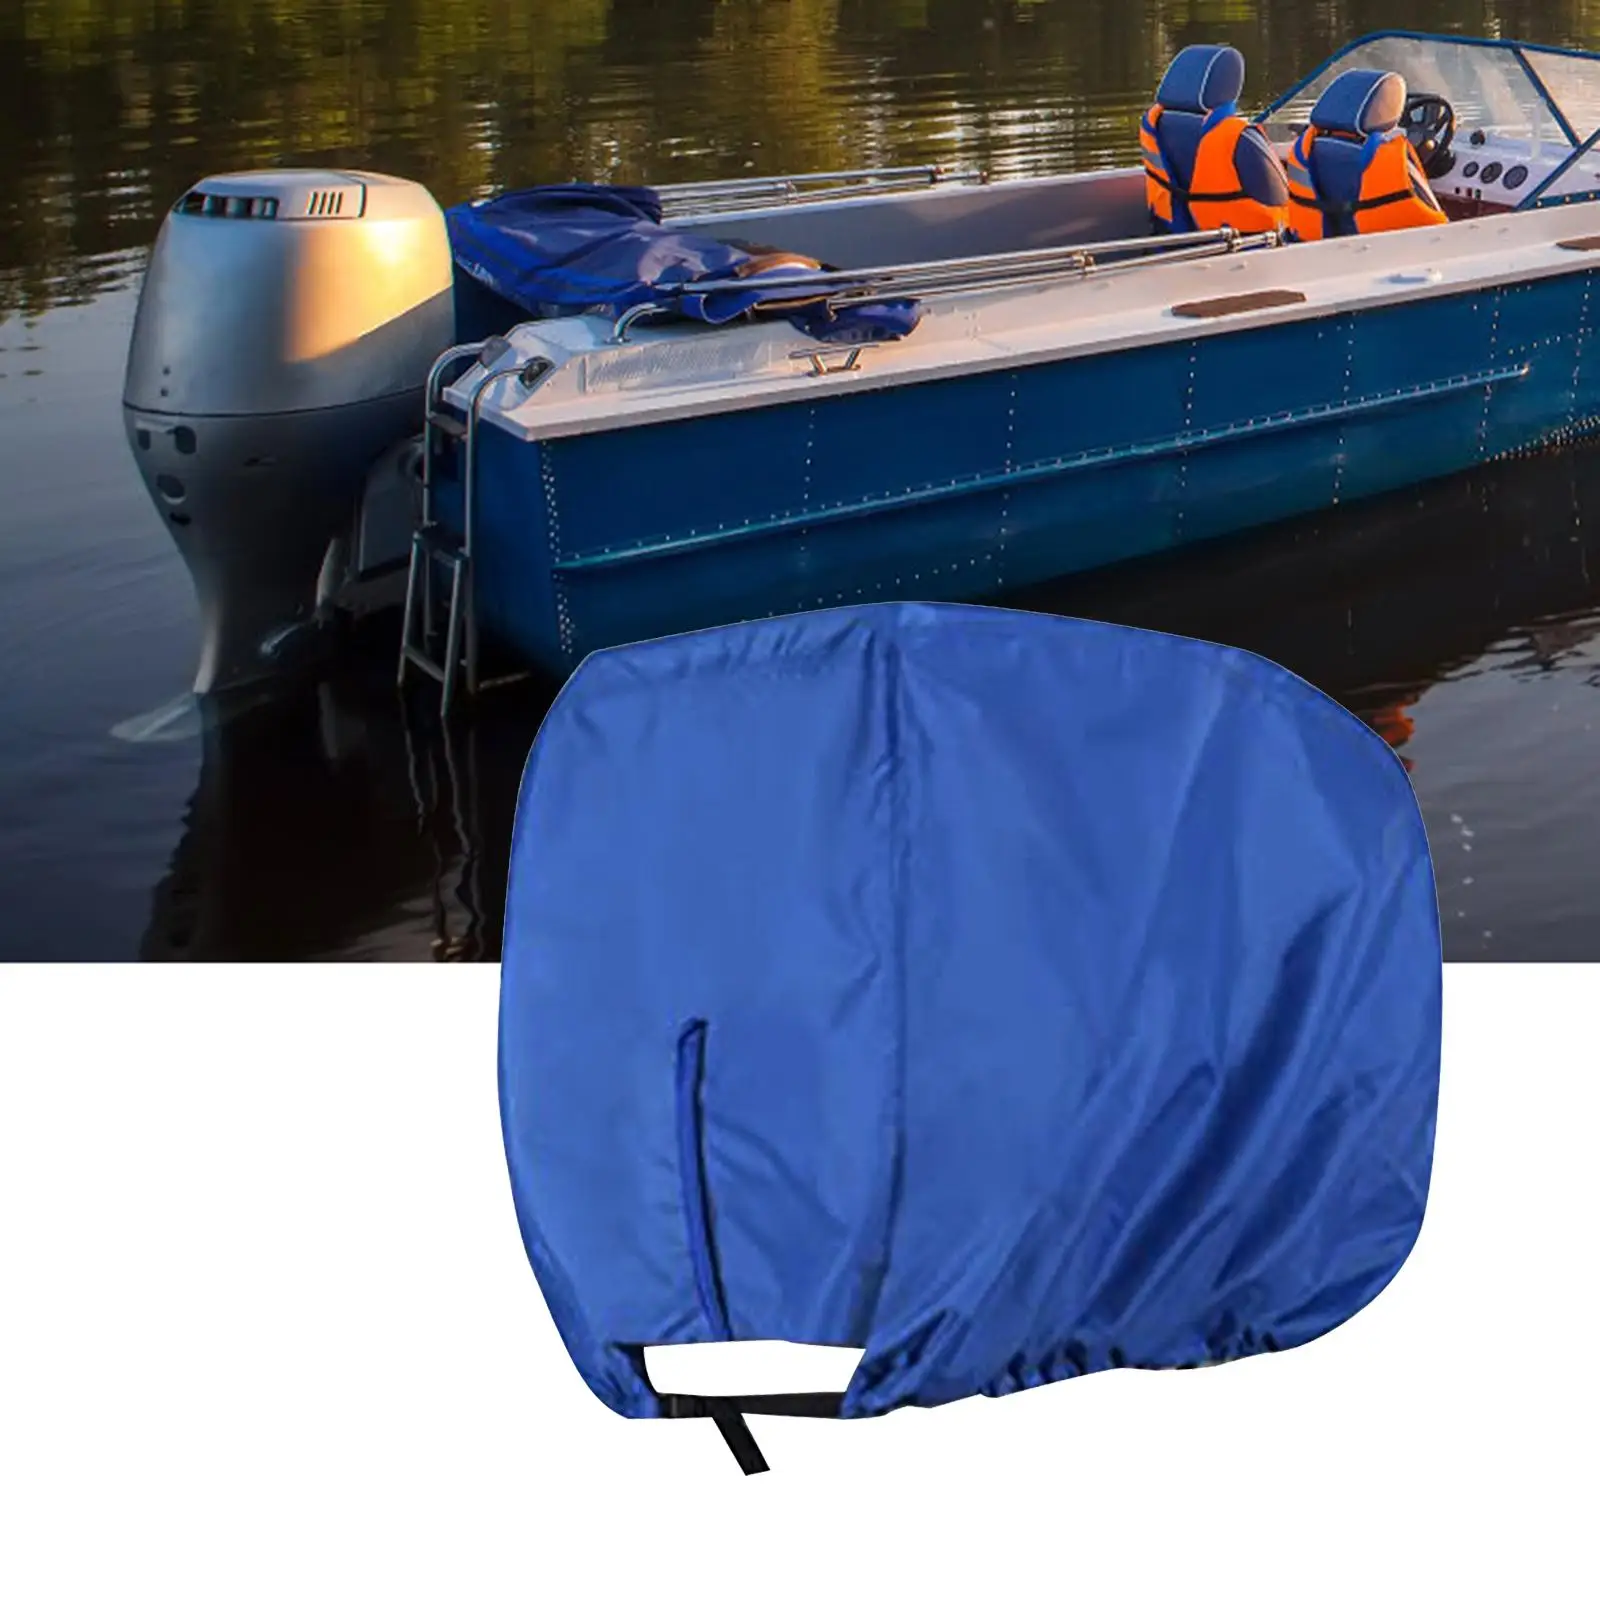 Outboard Motor Cover Durable Outboard Engine Cover for Boat Motor 25-50HP Boats Accessories